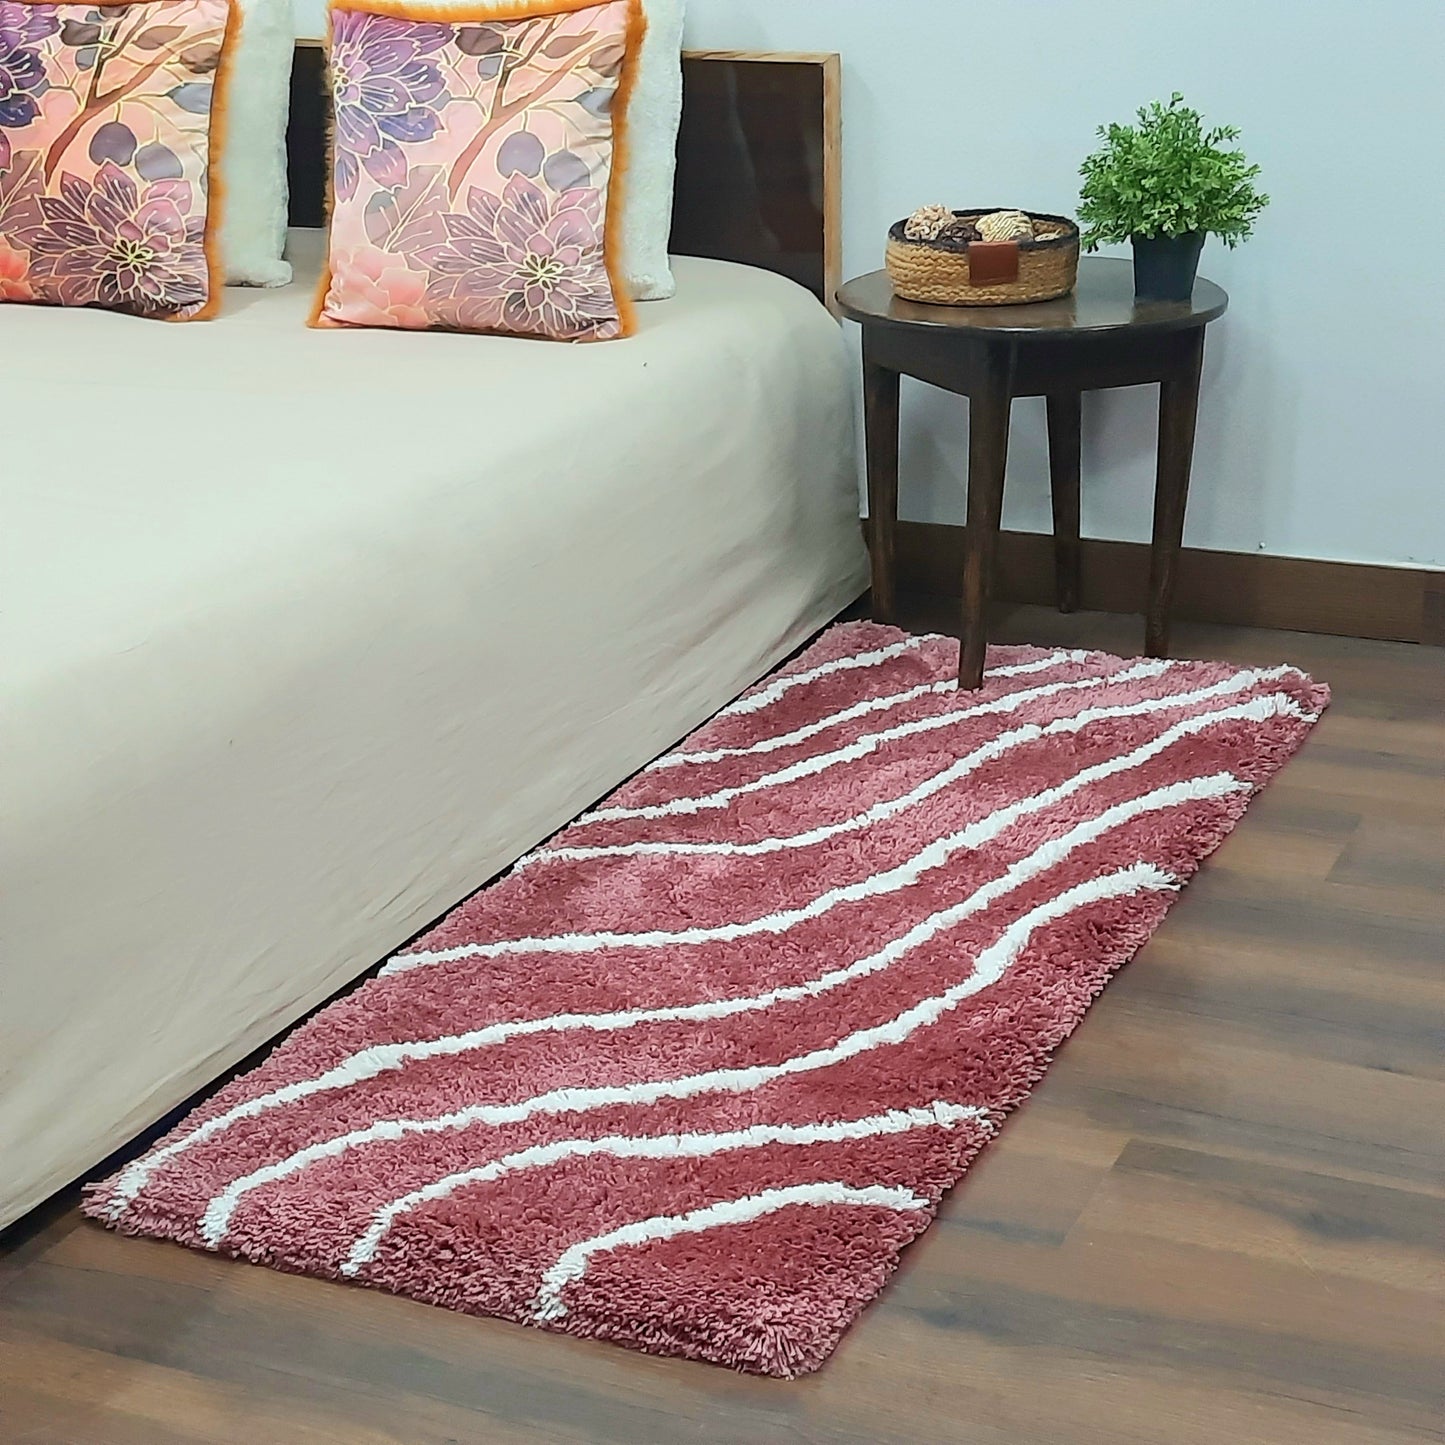 Plush Soft Washable Shaggy Carpet in Wine Color With White Wave Design /Bedside Runners by Avioni Home